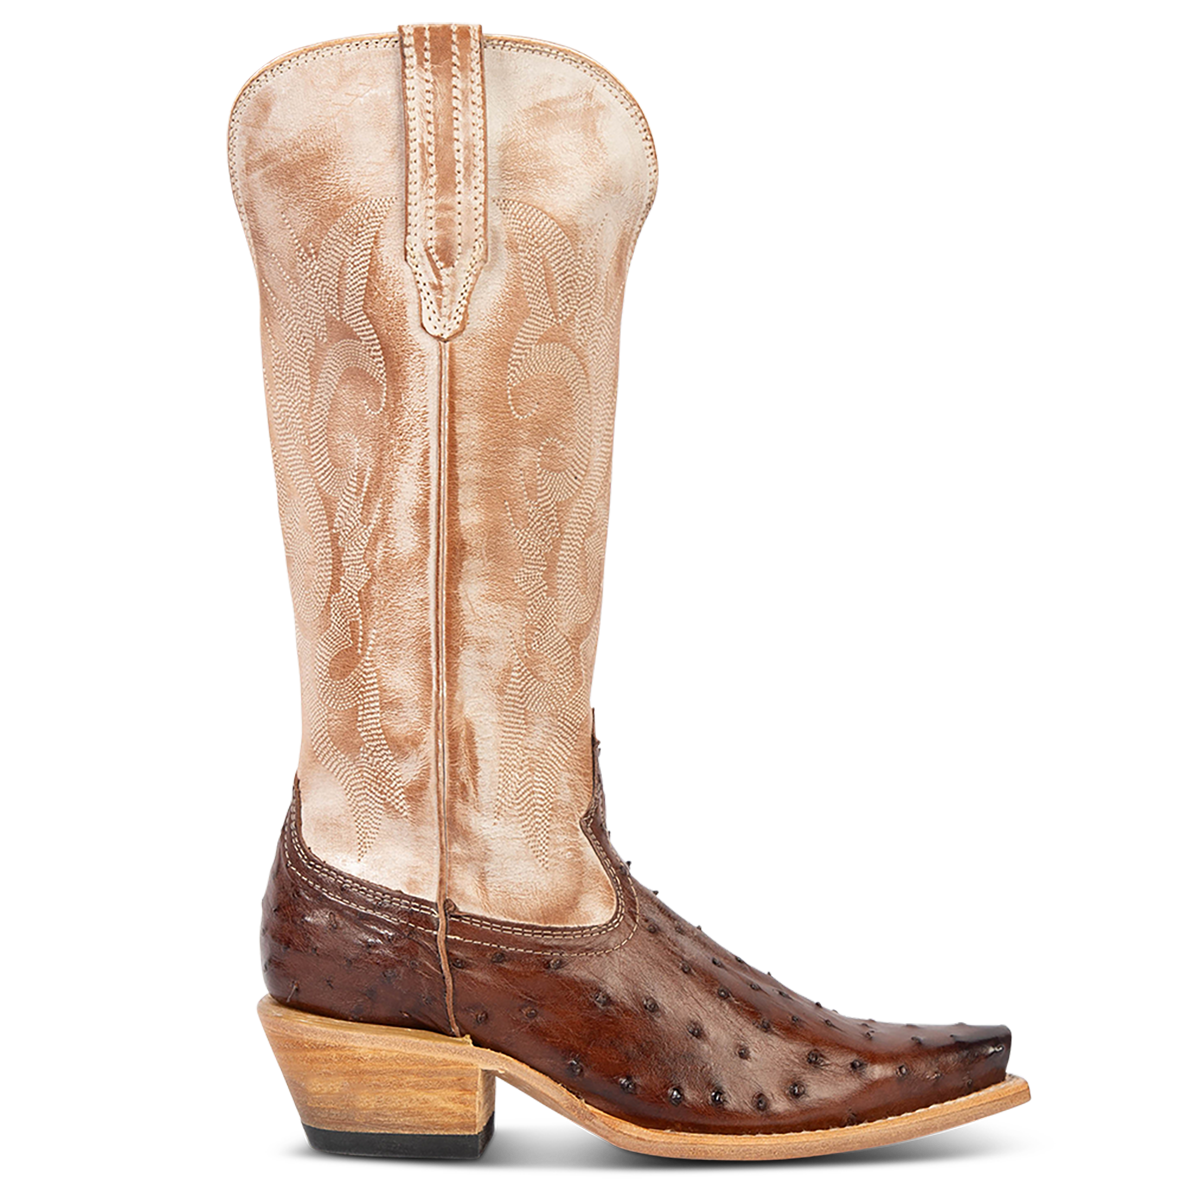 FREEBIRD women's Woodland brown ostrich leather cowboy boot with stitch detailing and snip toe construction